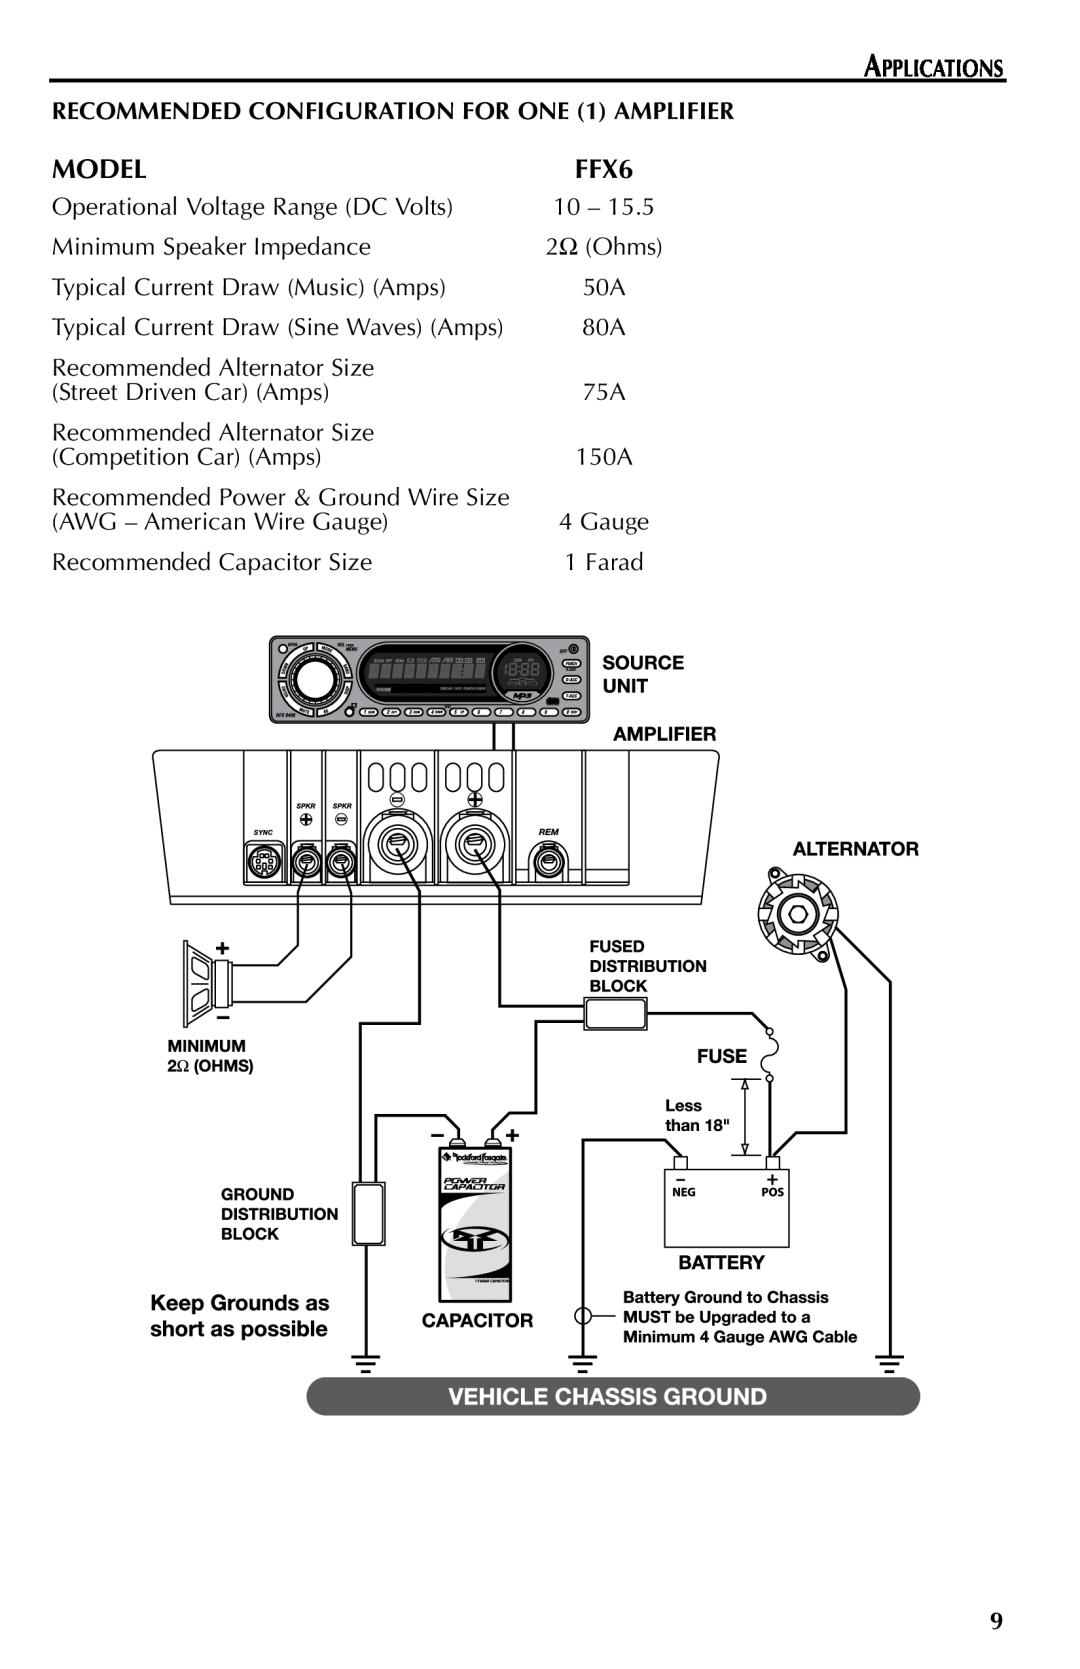 Rockford Fosgate FFX6 manual Model, Applications, RECOMMENDED CONFIGURATION FOR ONE 1 AMPLIFIER 